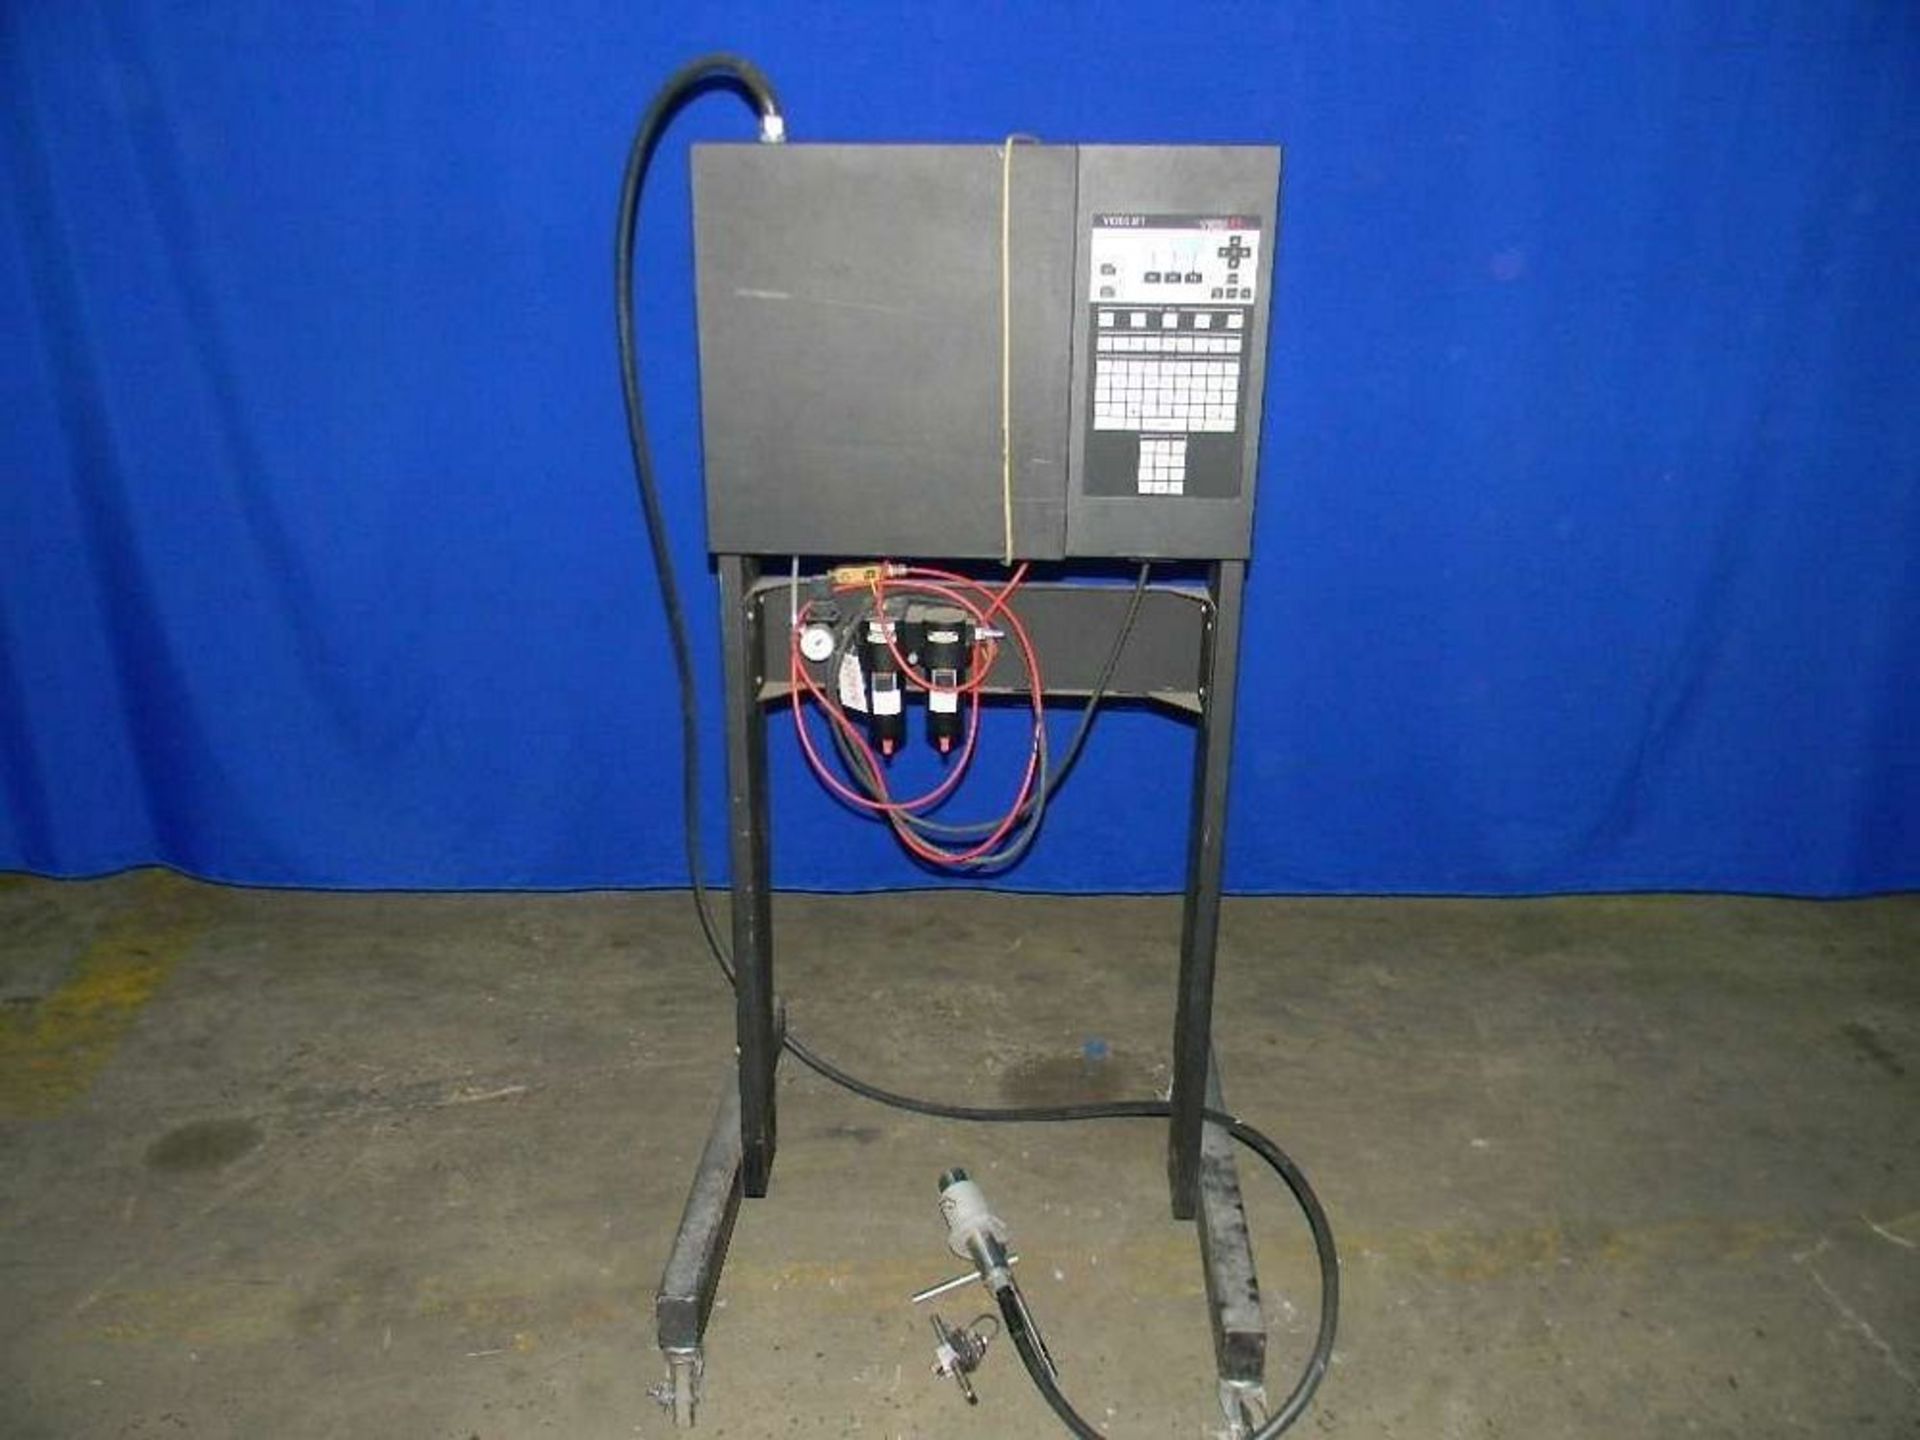 Qty (1) VideoJet 37e Ink Jet Coder - Painted steel cabinet and stand. - Equiped with remote